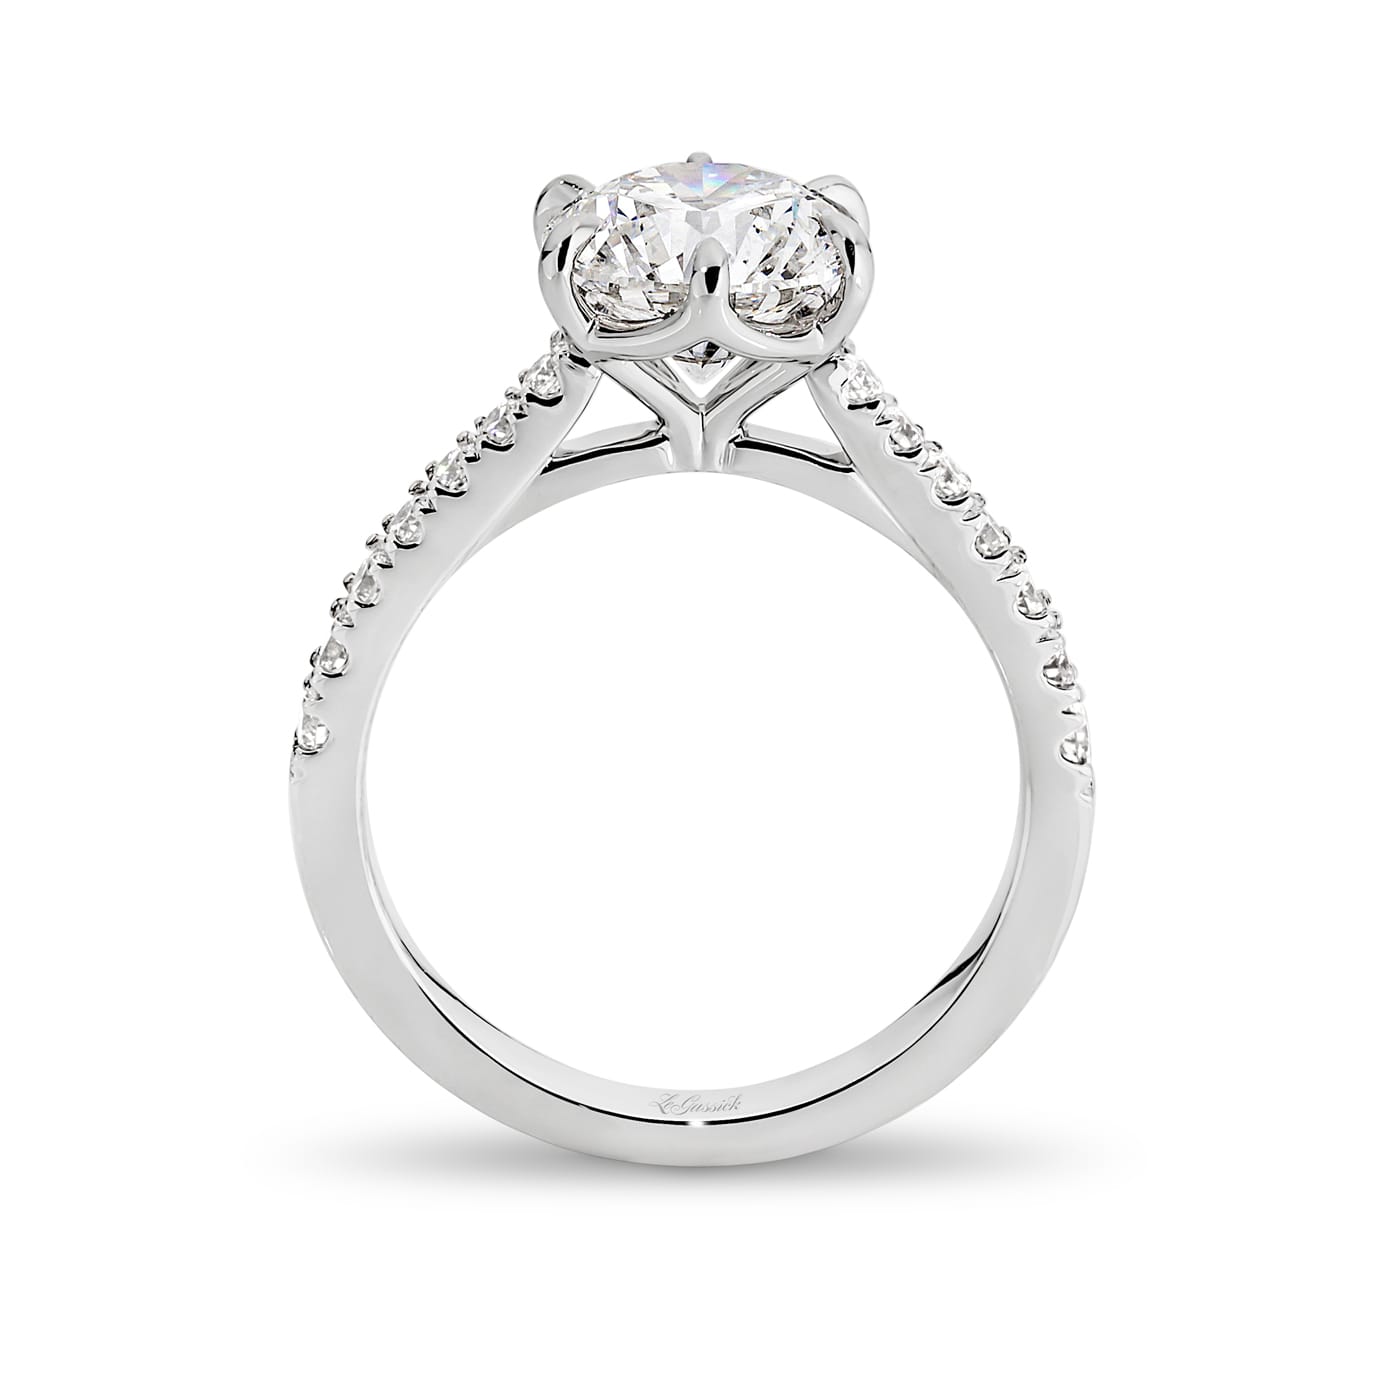 Milena features a 2.01 carat round brilliant cut white diamond at her centre. She is supported with a total of 14 round brilliant cut diamonds down her shoulders. She was designed and handcrafted by LeGassick's Master Jewellers, Gold Coast, Australia.